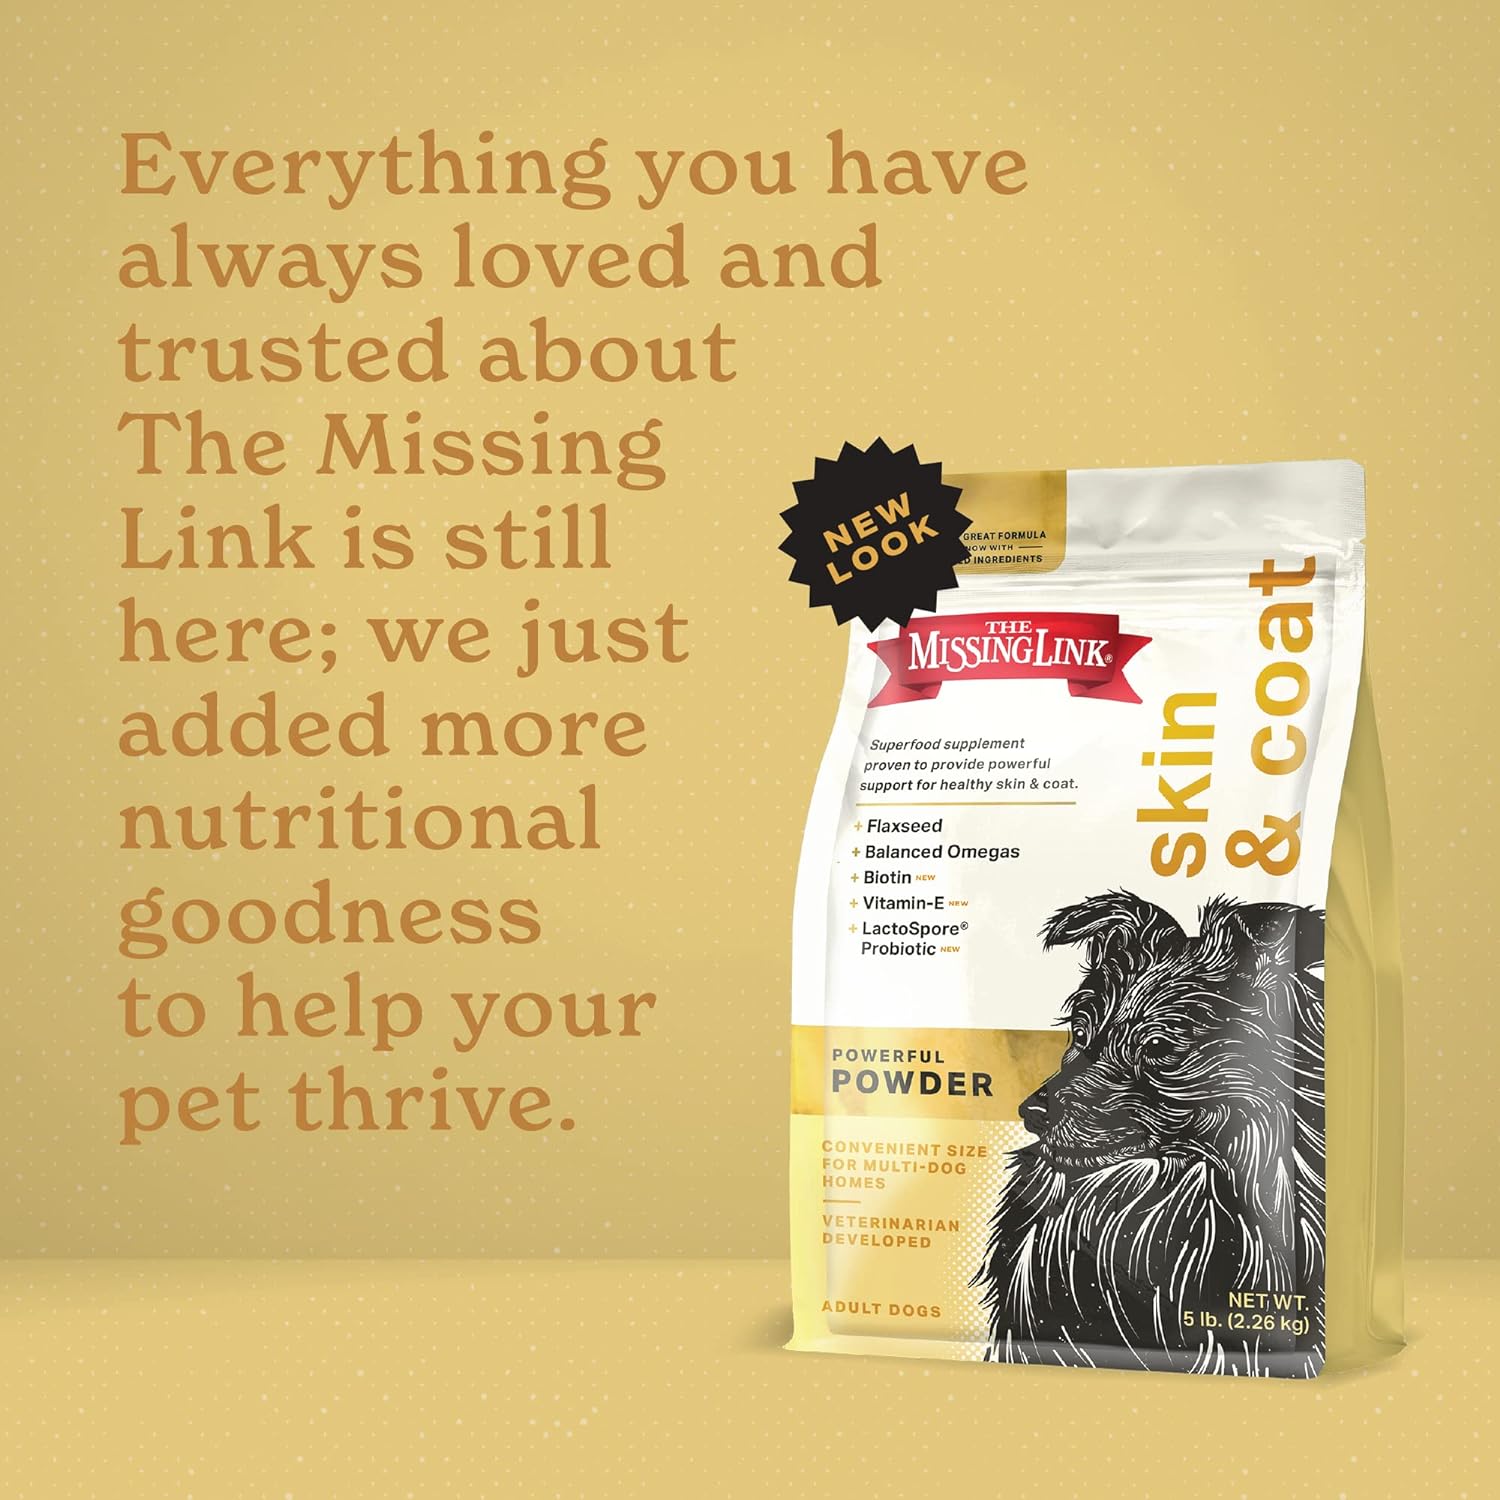 The Missing Link Skin & Coat + Probiotics Supplement 5lb Bag - Powerful Superfood Powder for Dogs Supports Healthy Skin & Glossy Coat, Promotes Hair Growth : Pet Supplements And Vitamins : Pet Supplies